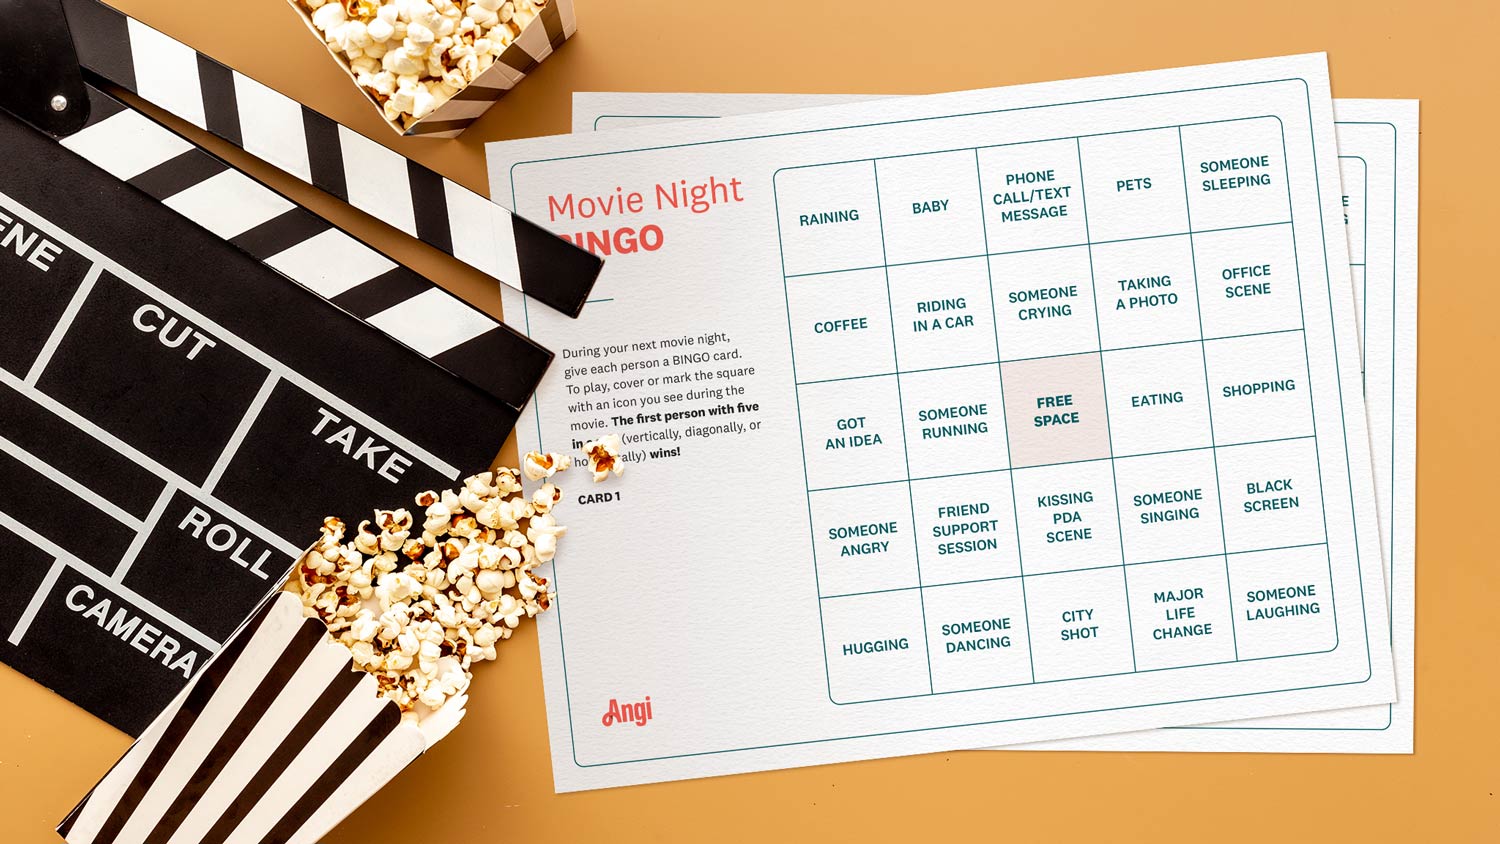 5 Family Room Ideas You’ll Absolutely Love (+ Movie Night Bingo Printables!)